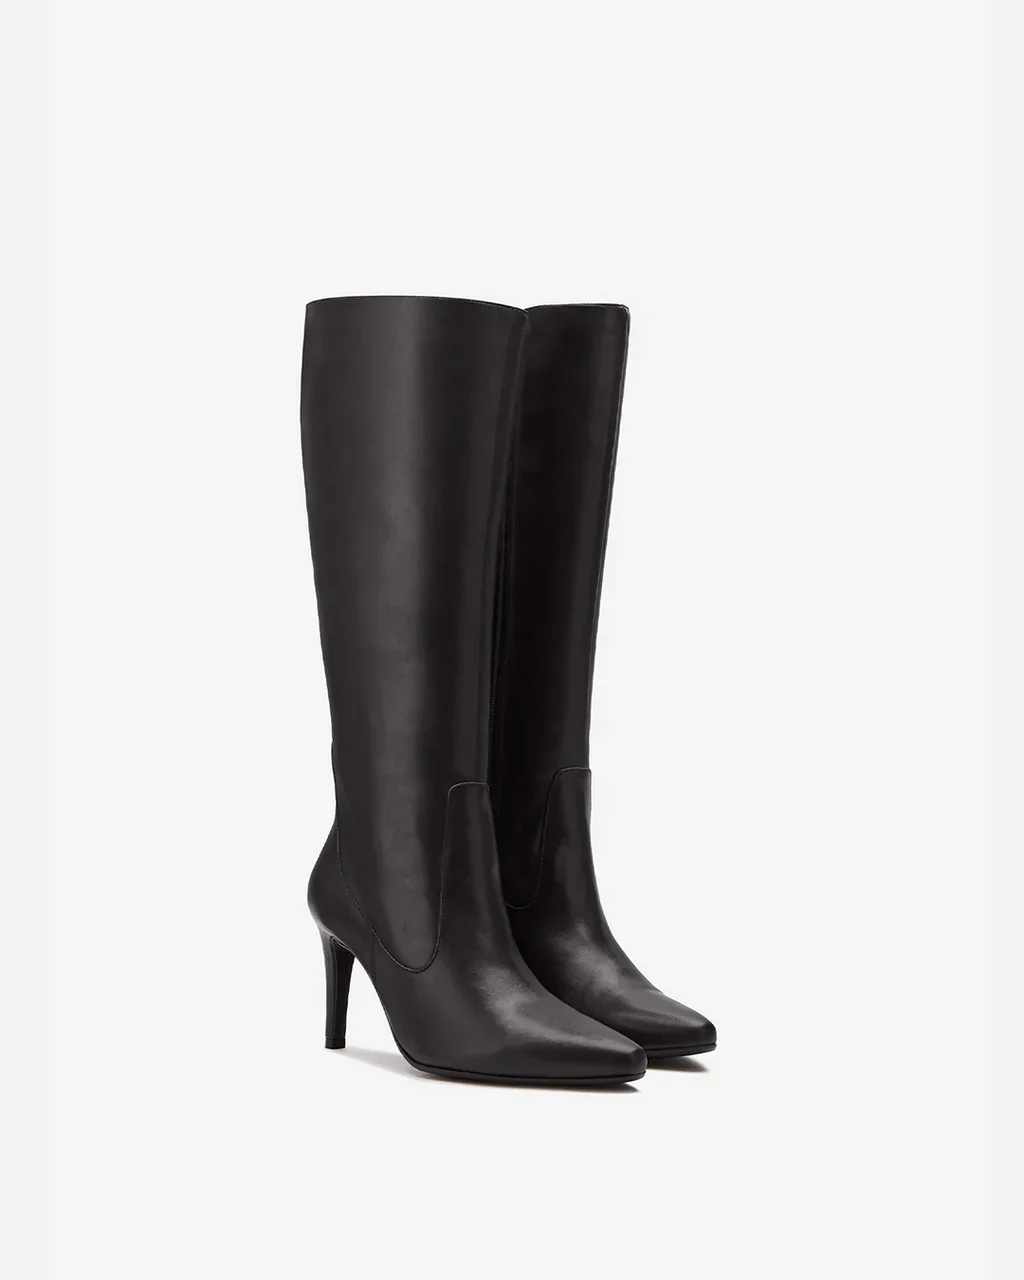 DuoBoots Review: Are The $475 Plus-Size Boots Worth It?